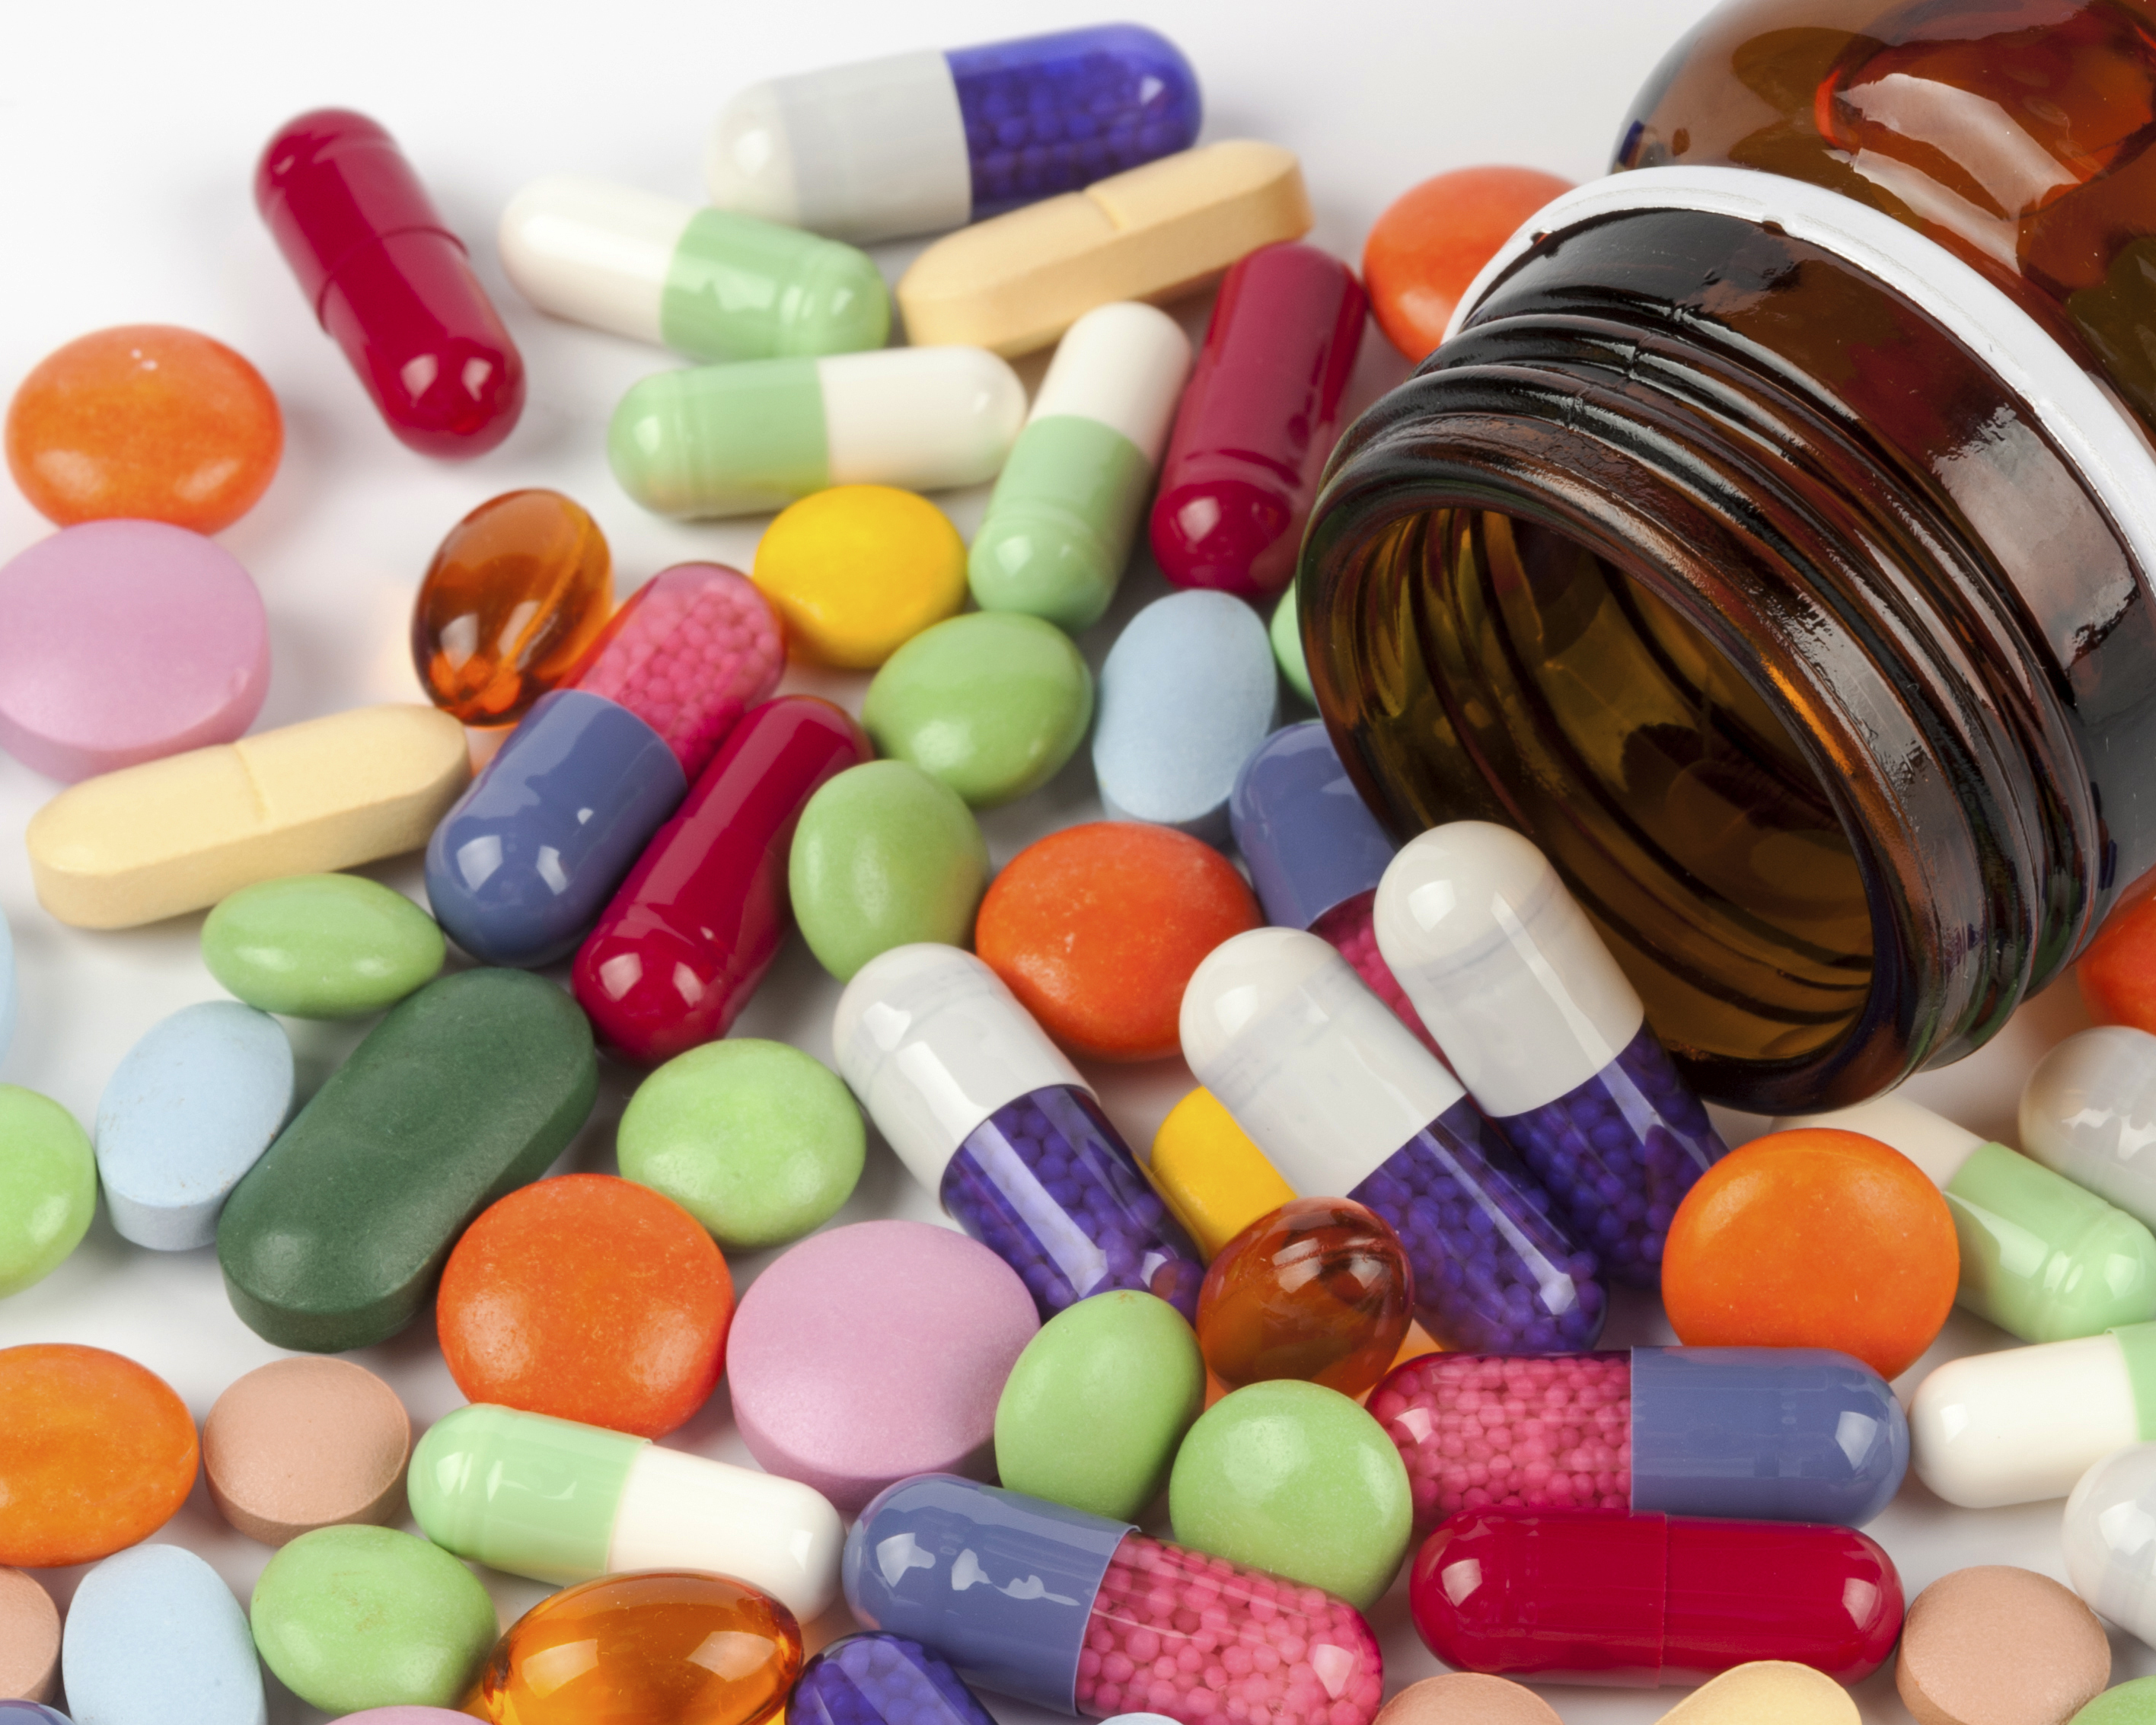 A tipped jar surrounded by colorful pills and caplets.